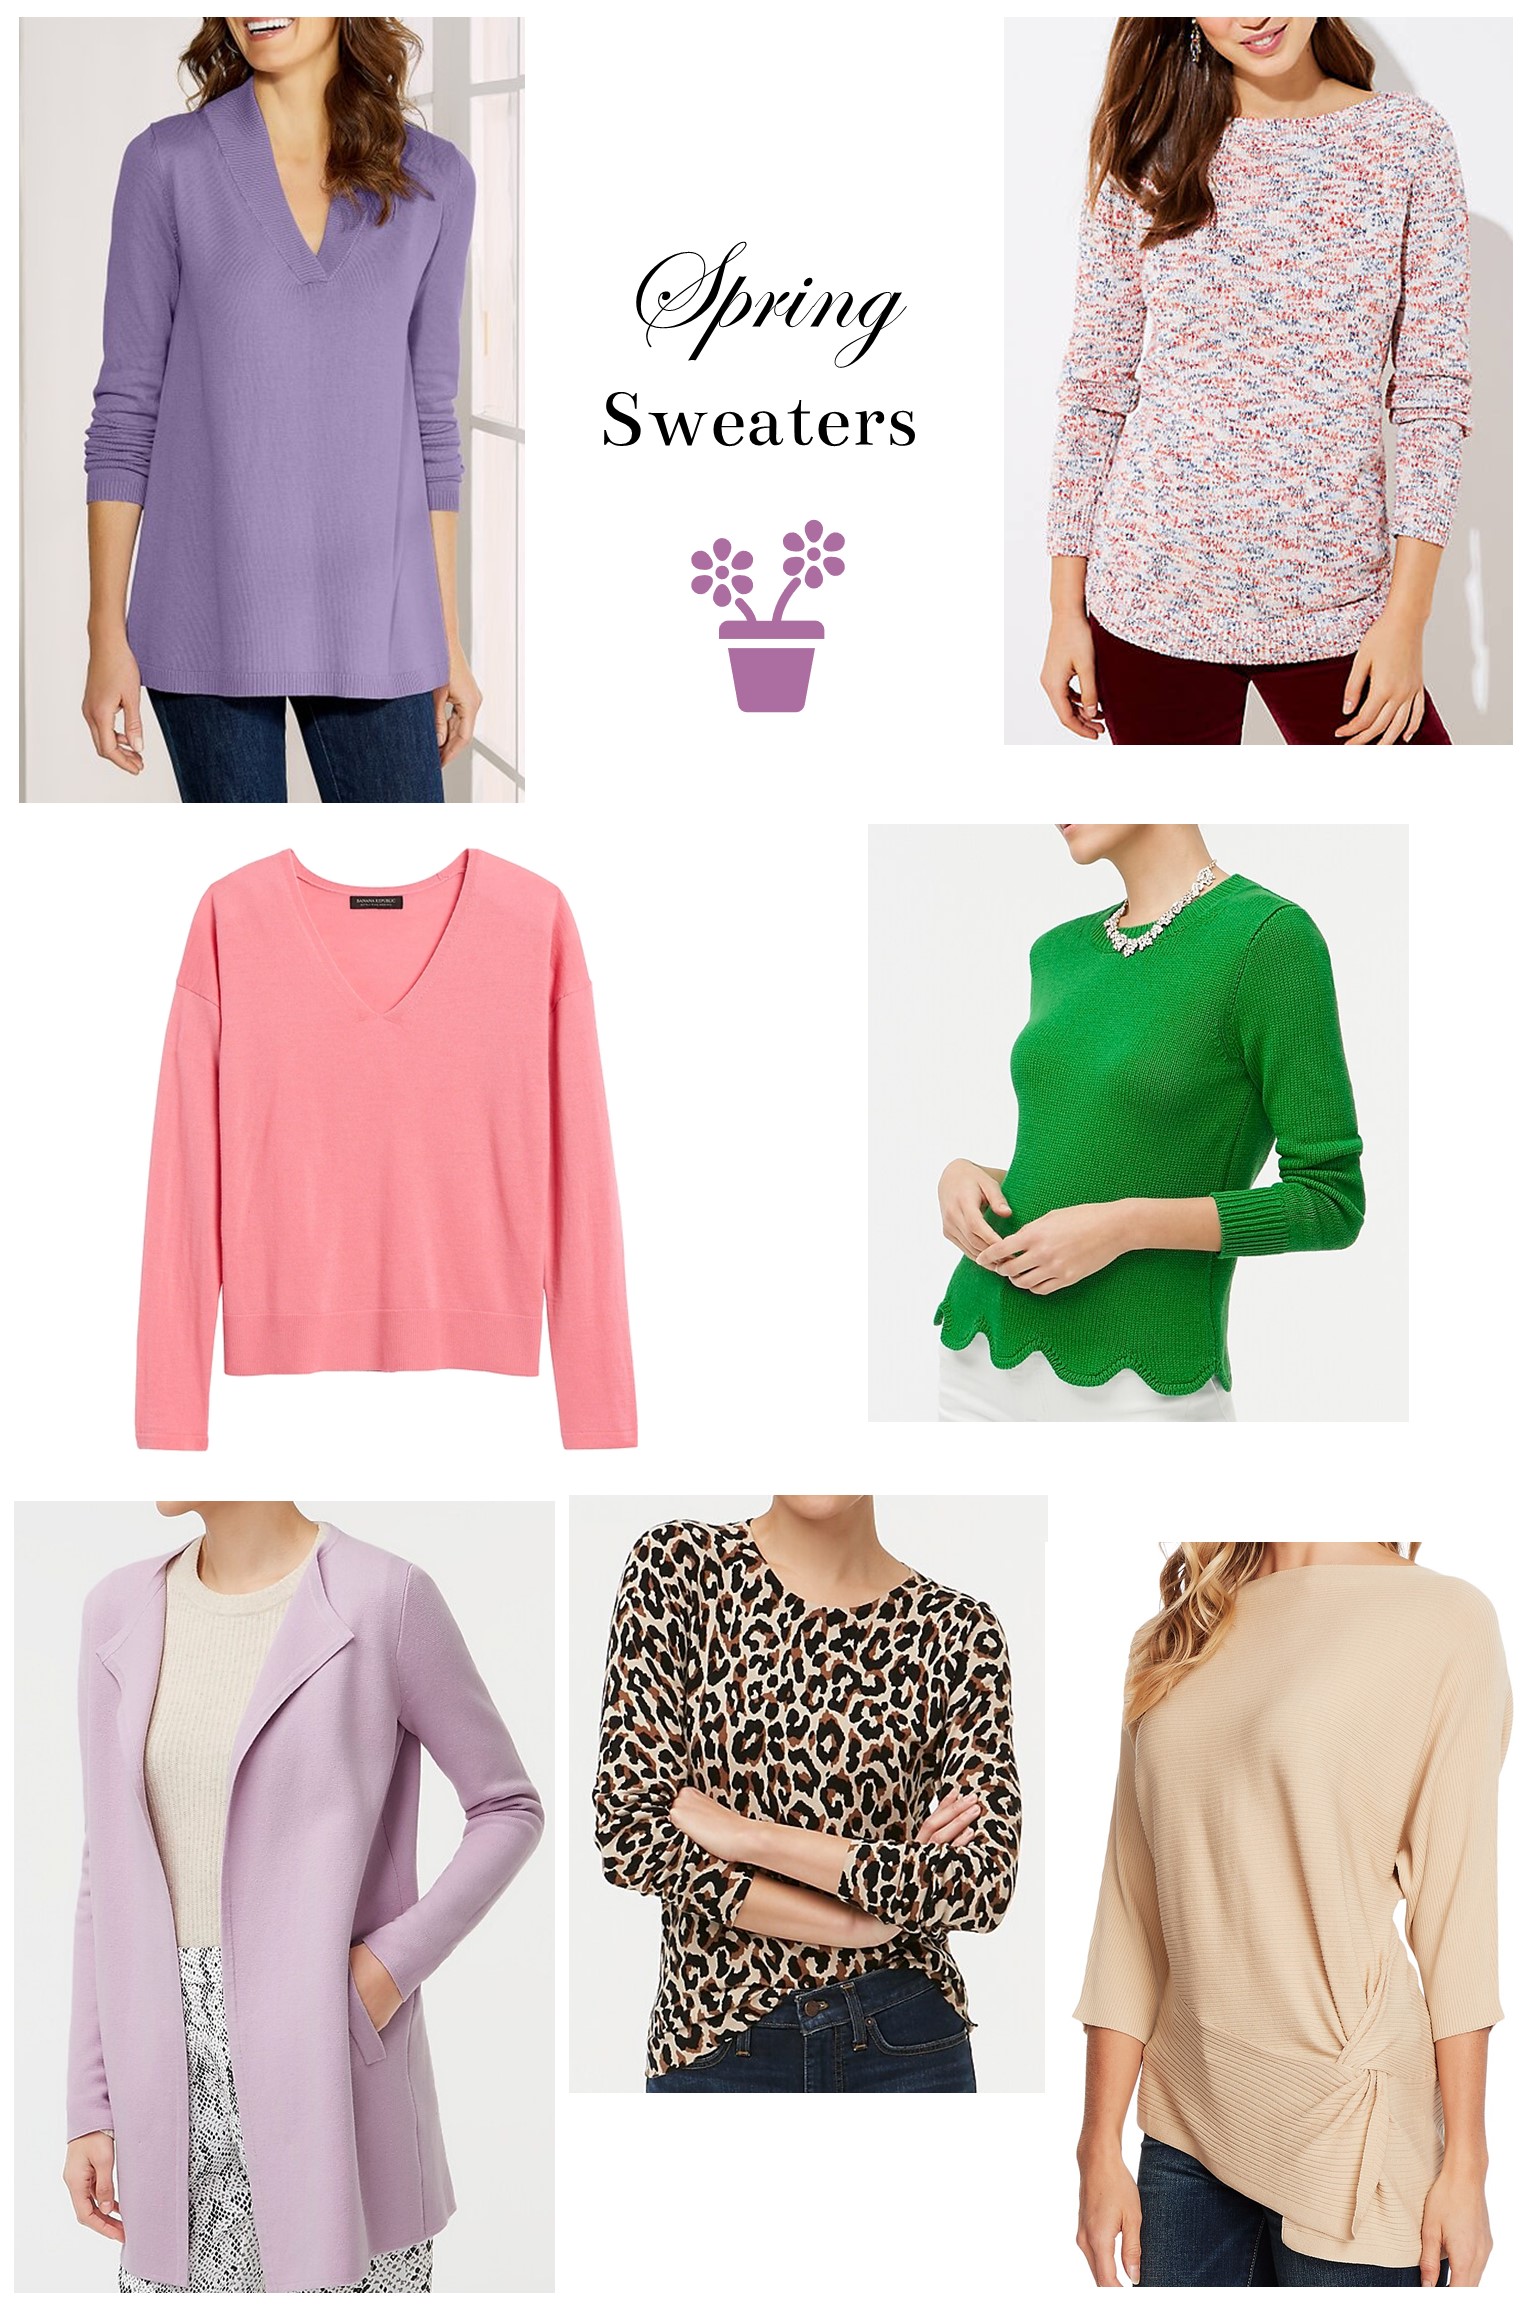 Pictures of Spring Sweaters